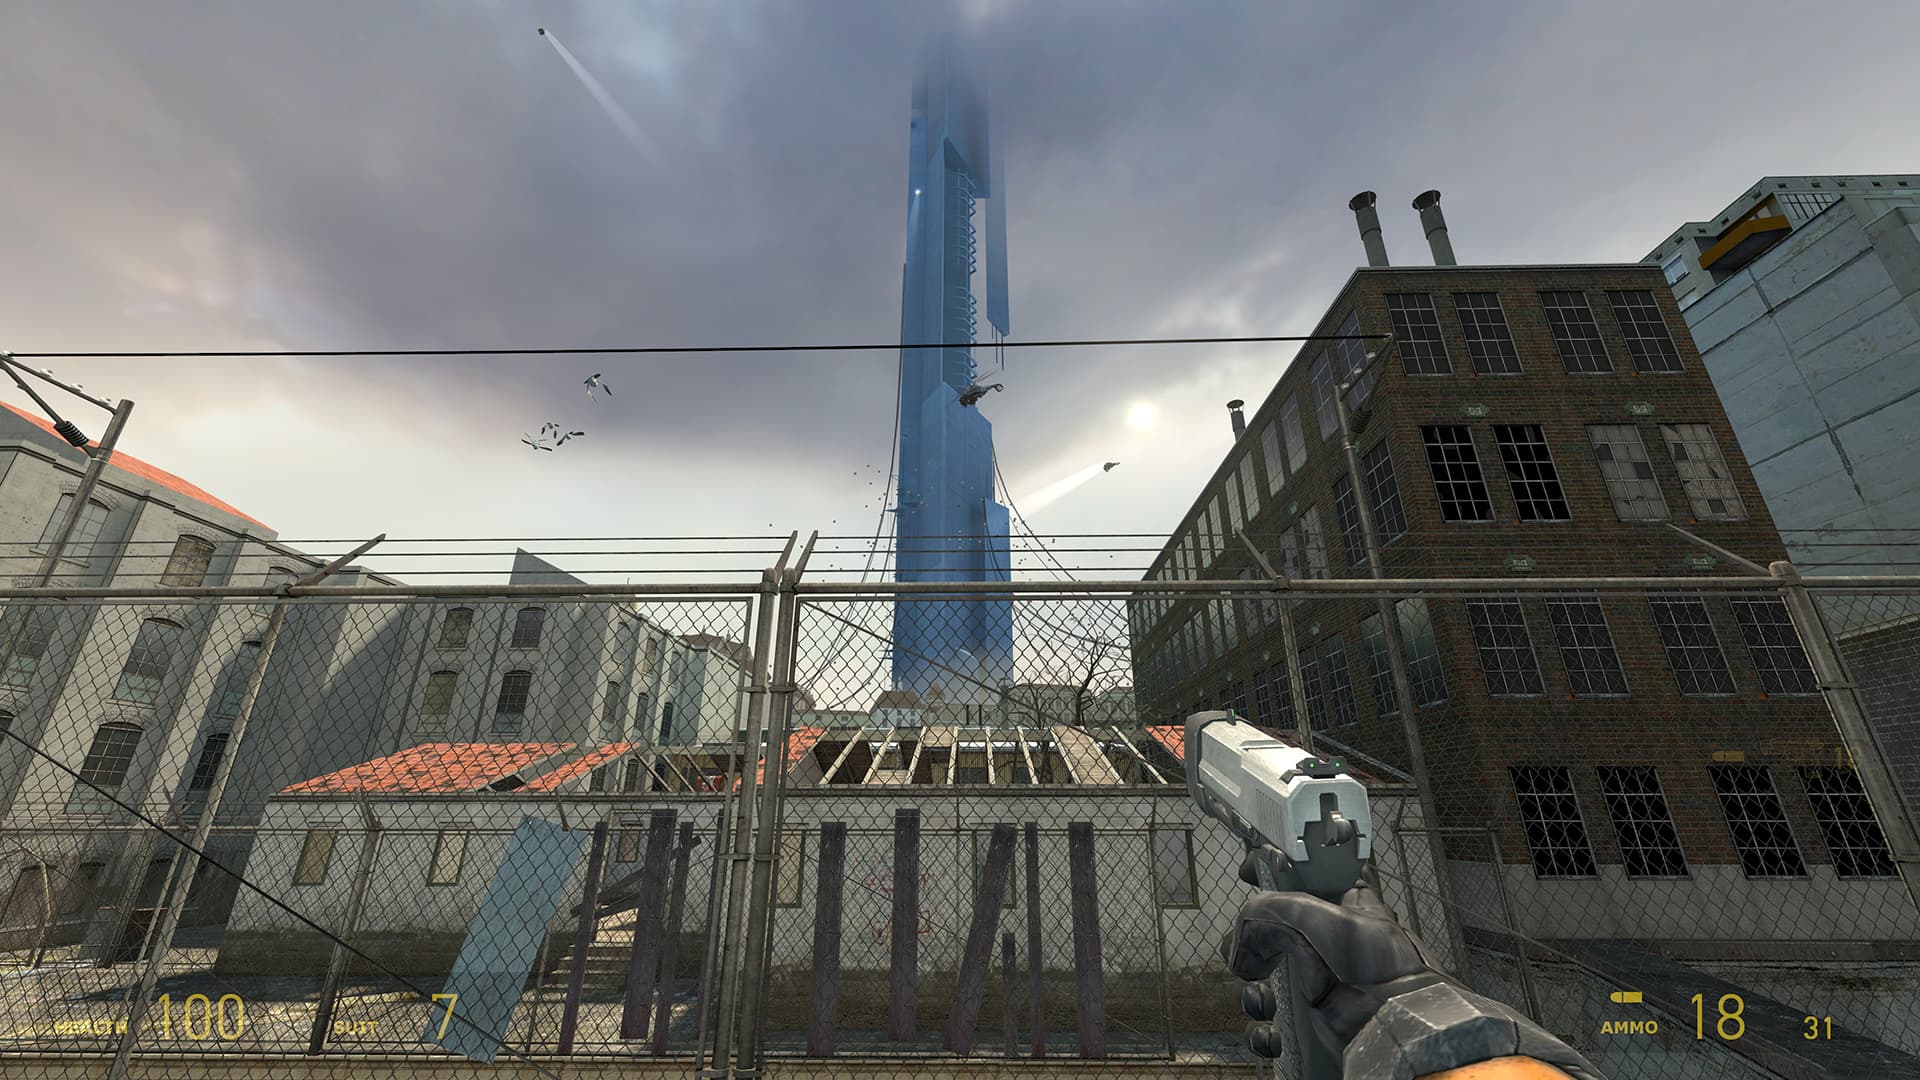 A screenshot from Half-Life 2. The player stares at the City 17 skyline, with the Citadel looming above as a Combine Hunter-Chopper flies by and scanners roam through the sky.